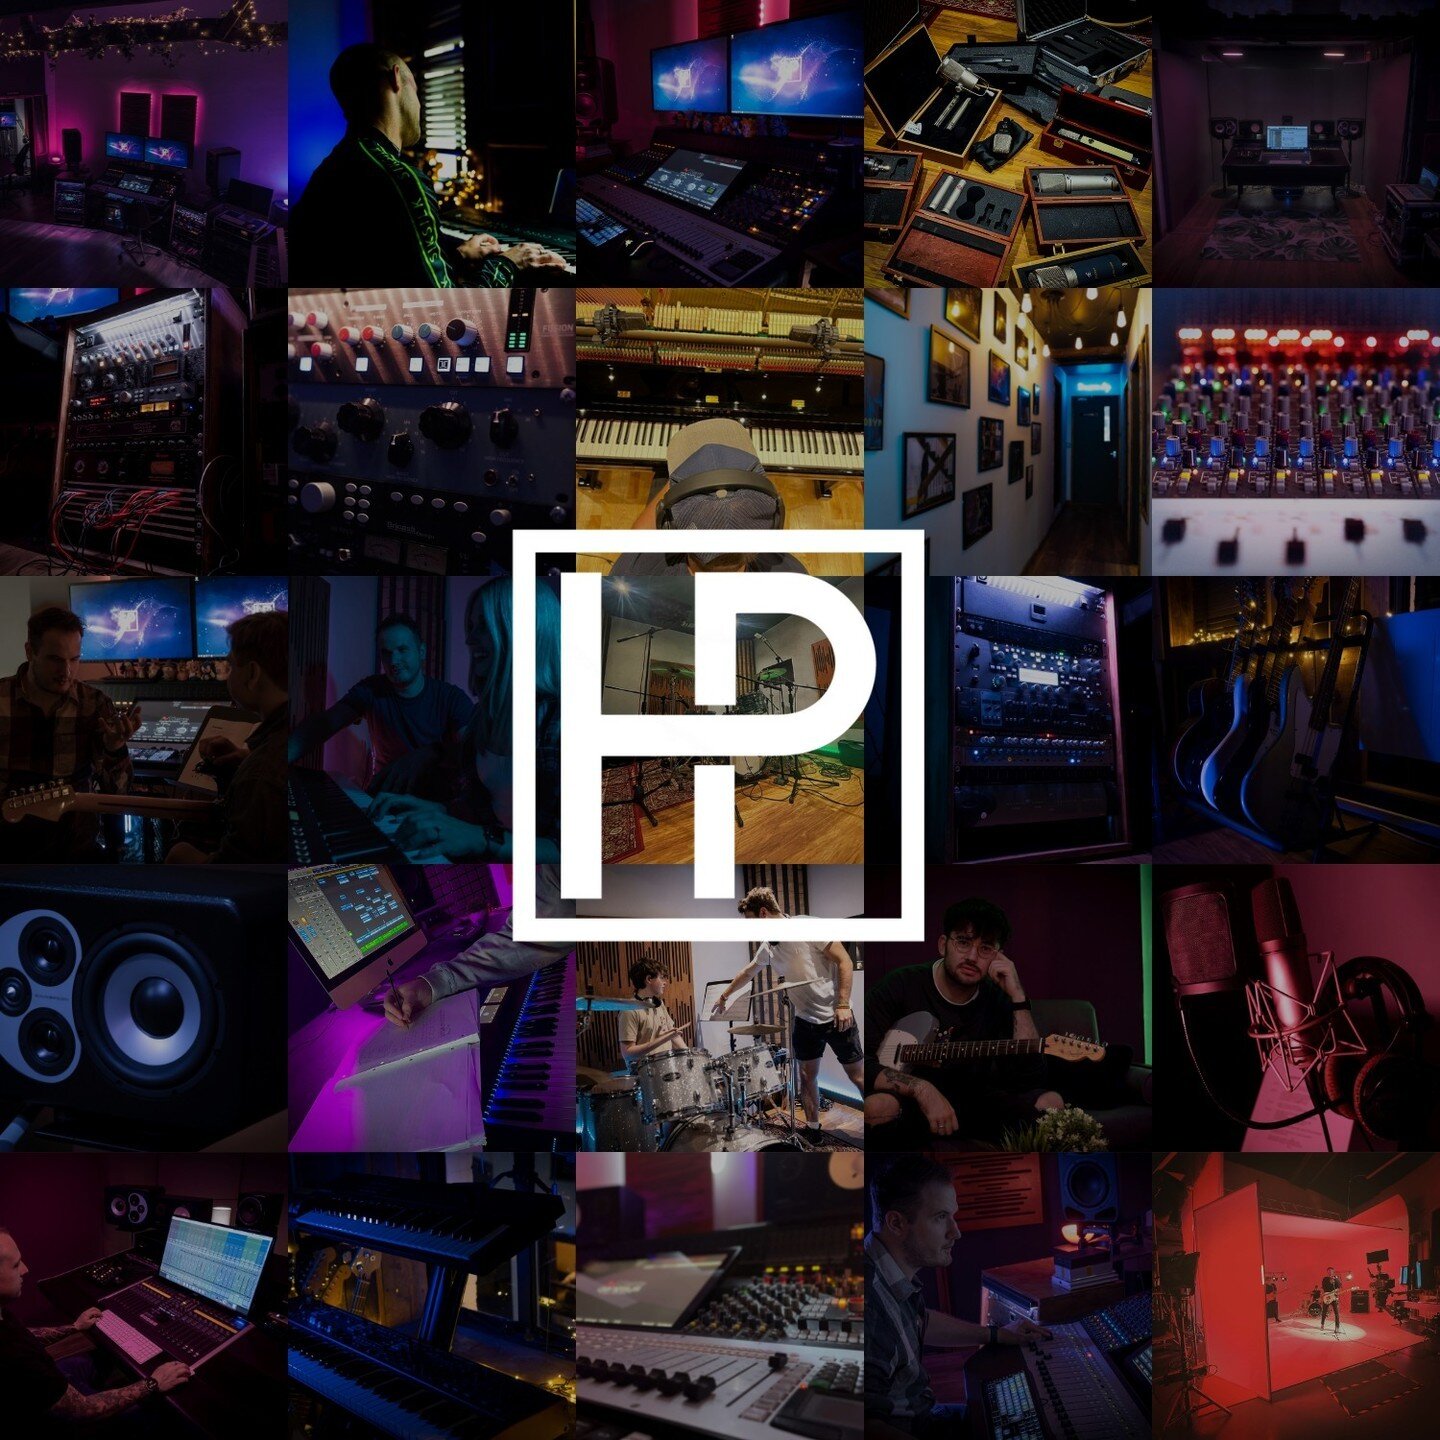 The next chapter of HP Music. We can't wait to show you what's in store!⁠
⁠
⁠
#musicproducer #audio #producer #newmusic #singersongwriter #studiolife #producerlife #musicproduction #singing #musicindustry #musician #musicstudio #recordingstudio #musi